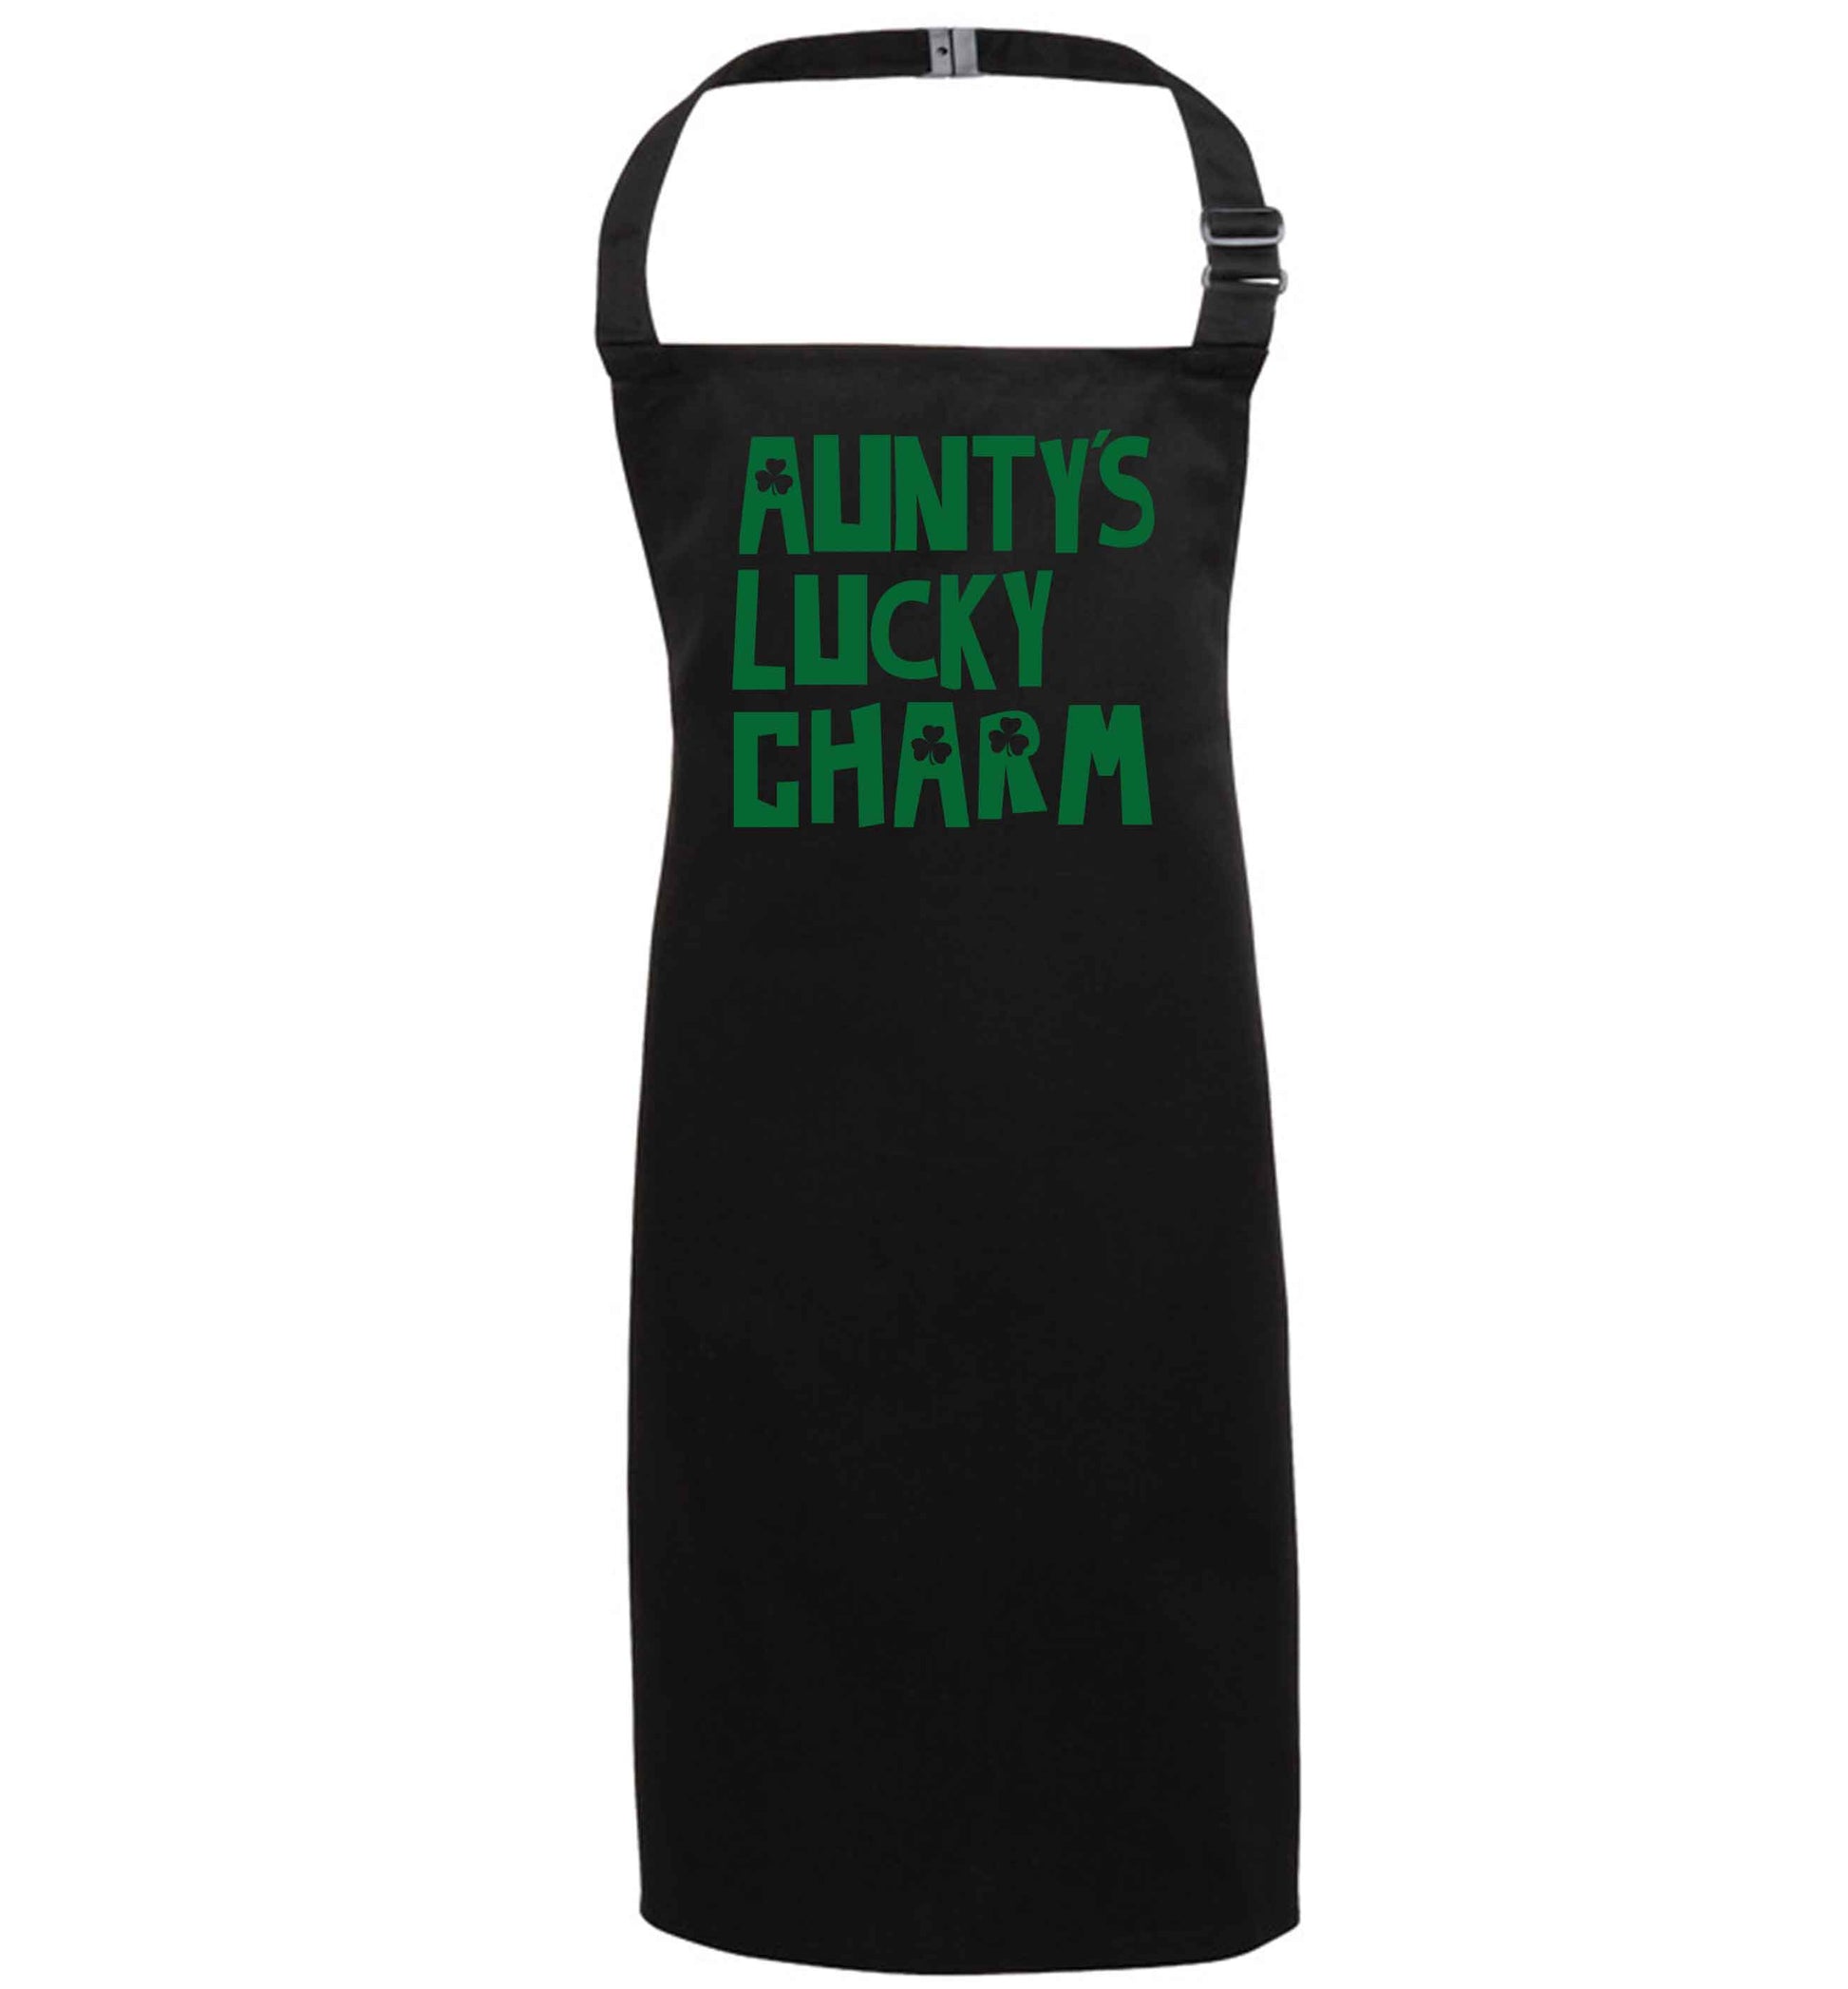 Aunty's lucky charm black apron 7-10 years